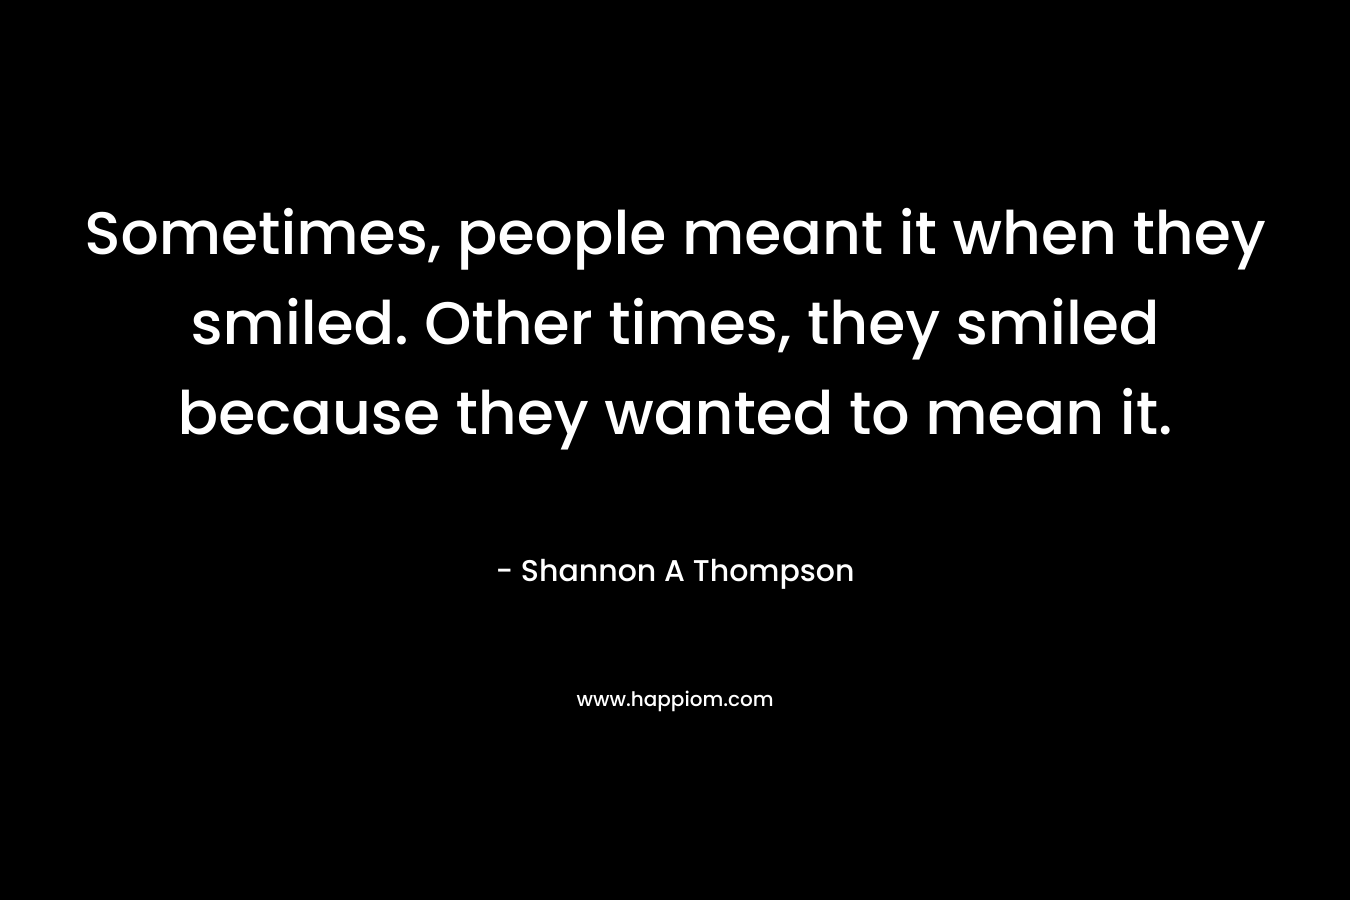 Sometimes, people meant it when they smiled. Other times, they smiled because they wanted to mean it.